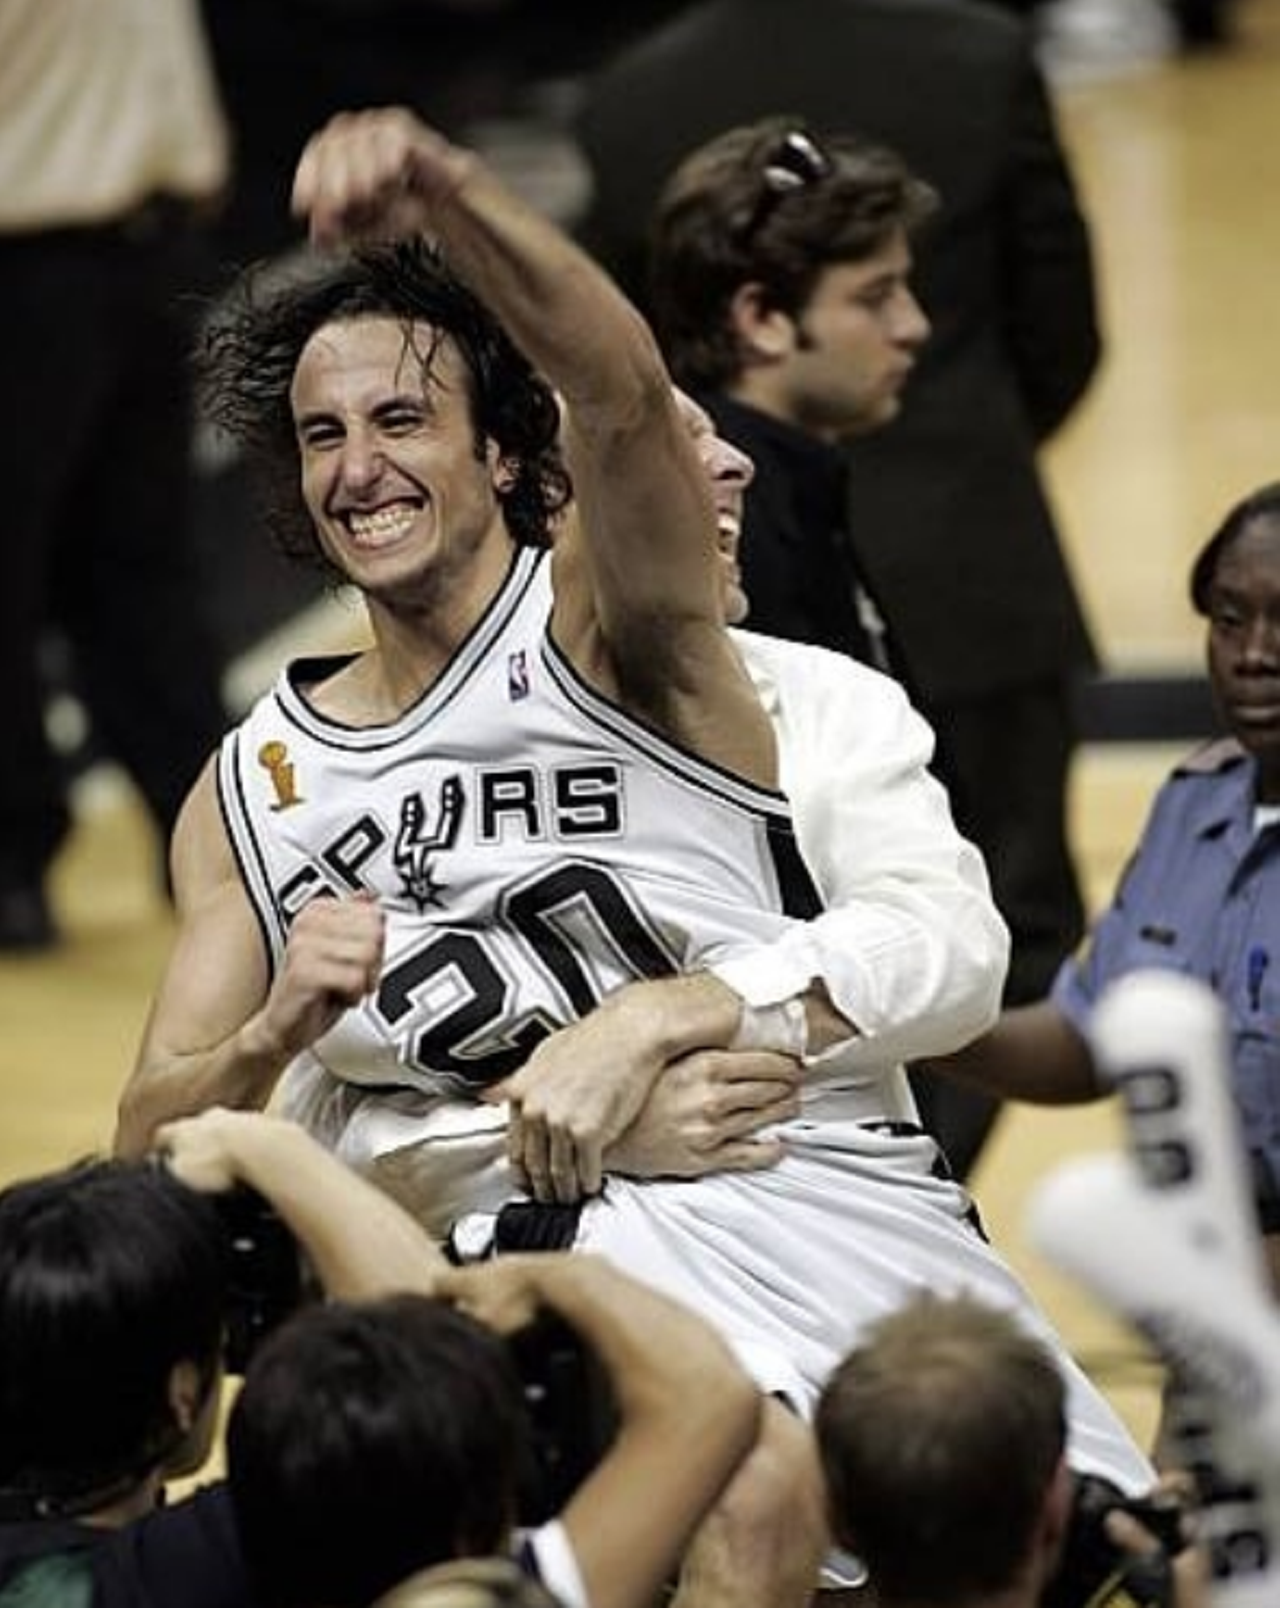 The fact that his Euro step changed the NBA
Flirting with being a traveling violation, the Euro step makes a huge difference on the offensive. After spending a few years playing in Europe, Ginobili brought his skills and the move to the NBA. His signature move changed the way basketball is played in the U.S. and has led to other players adopting it as well.
Photo via Instagram / patar35